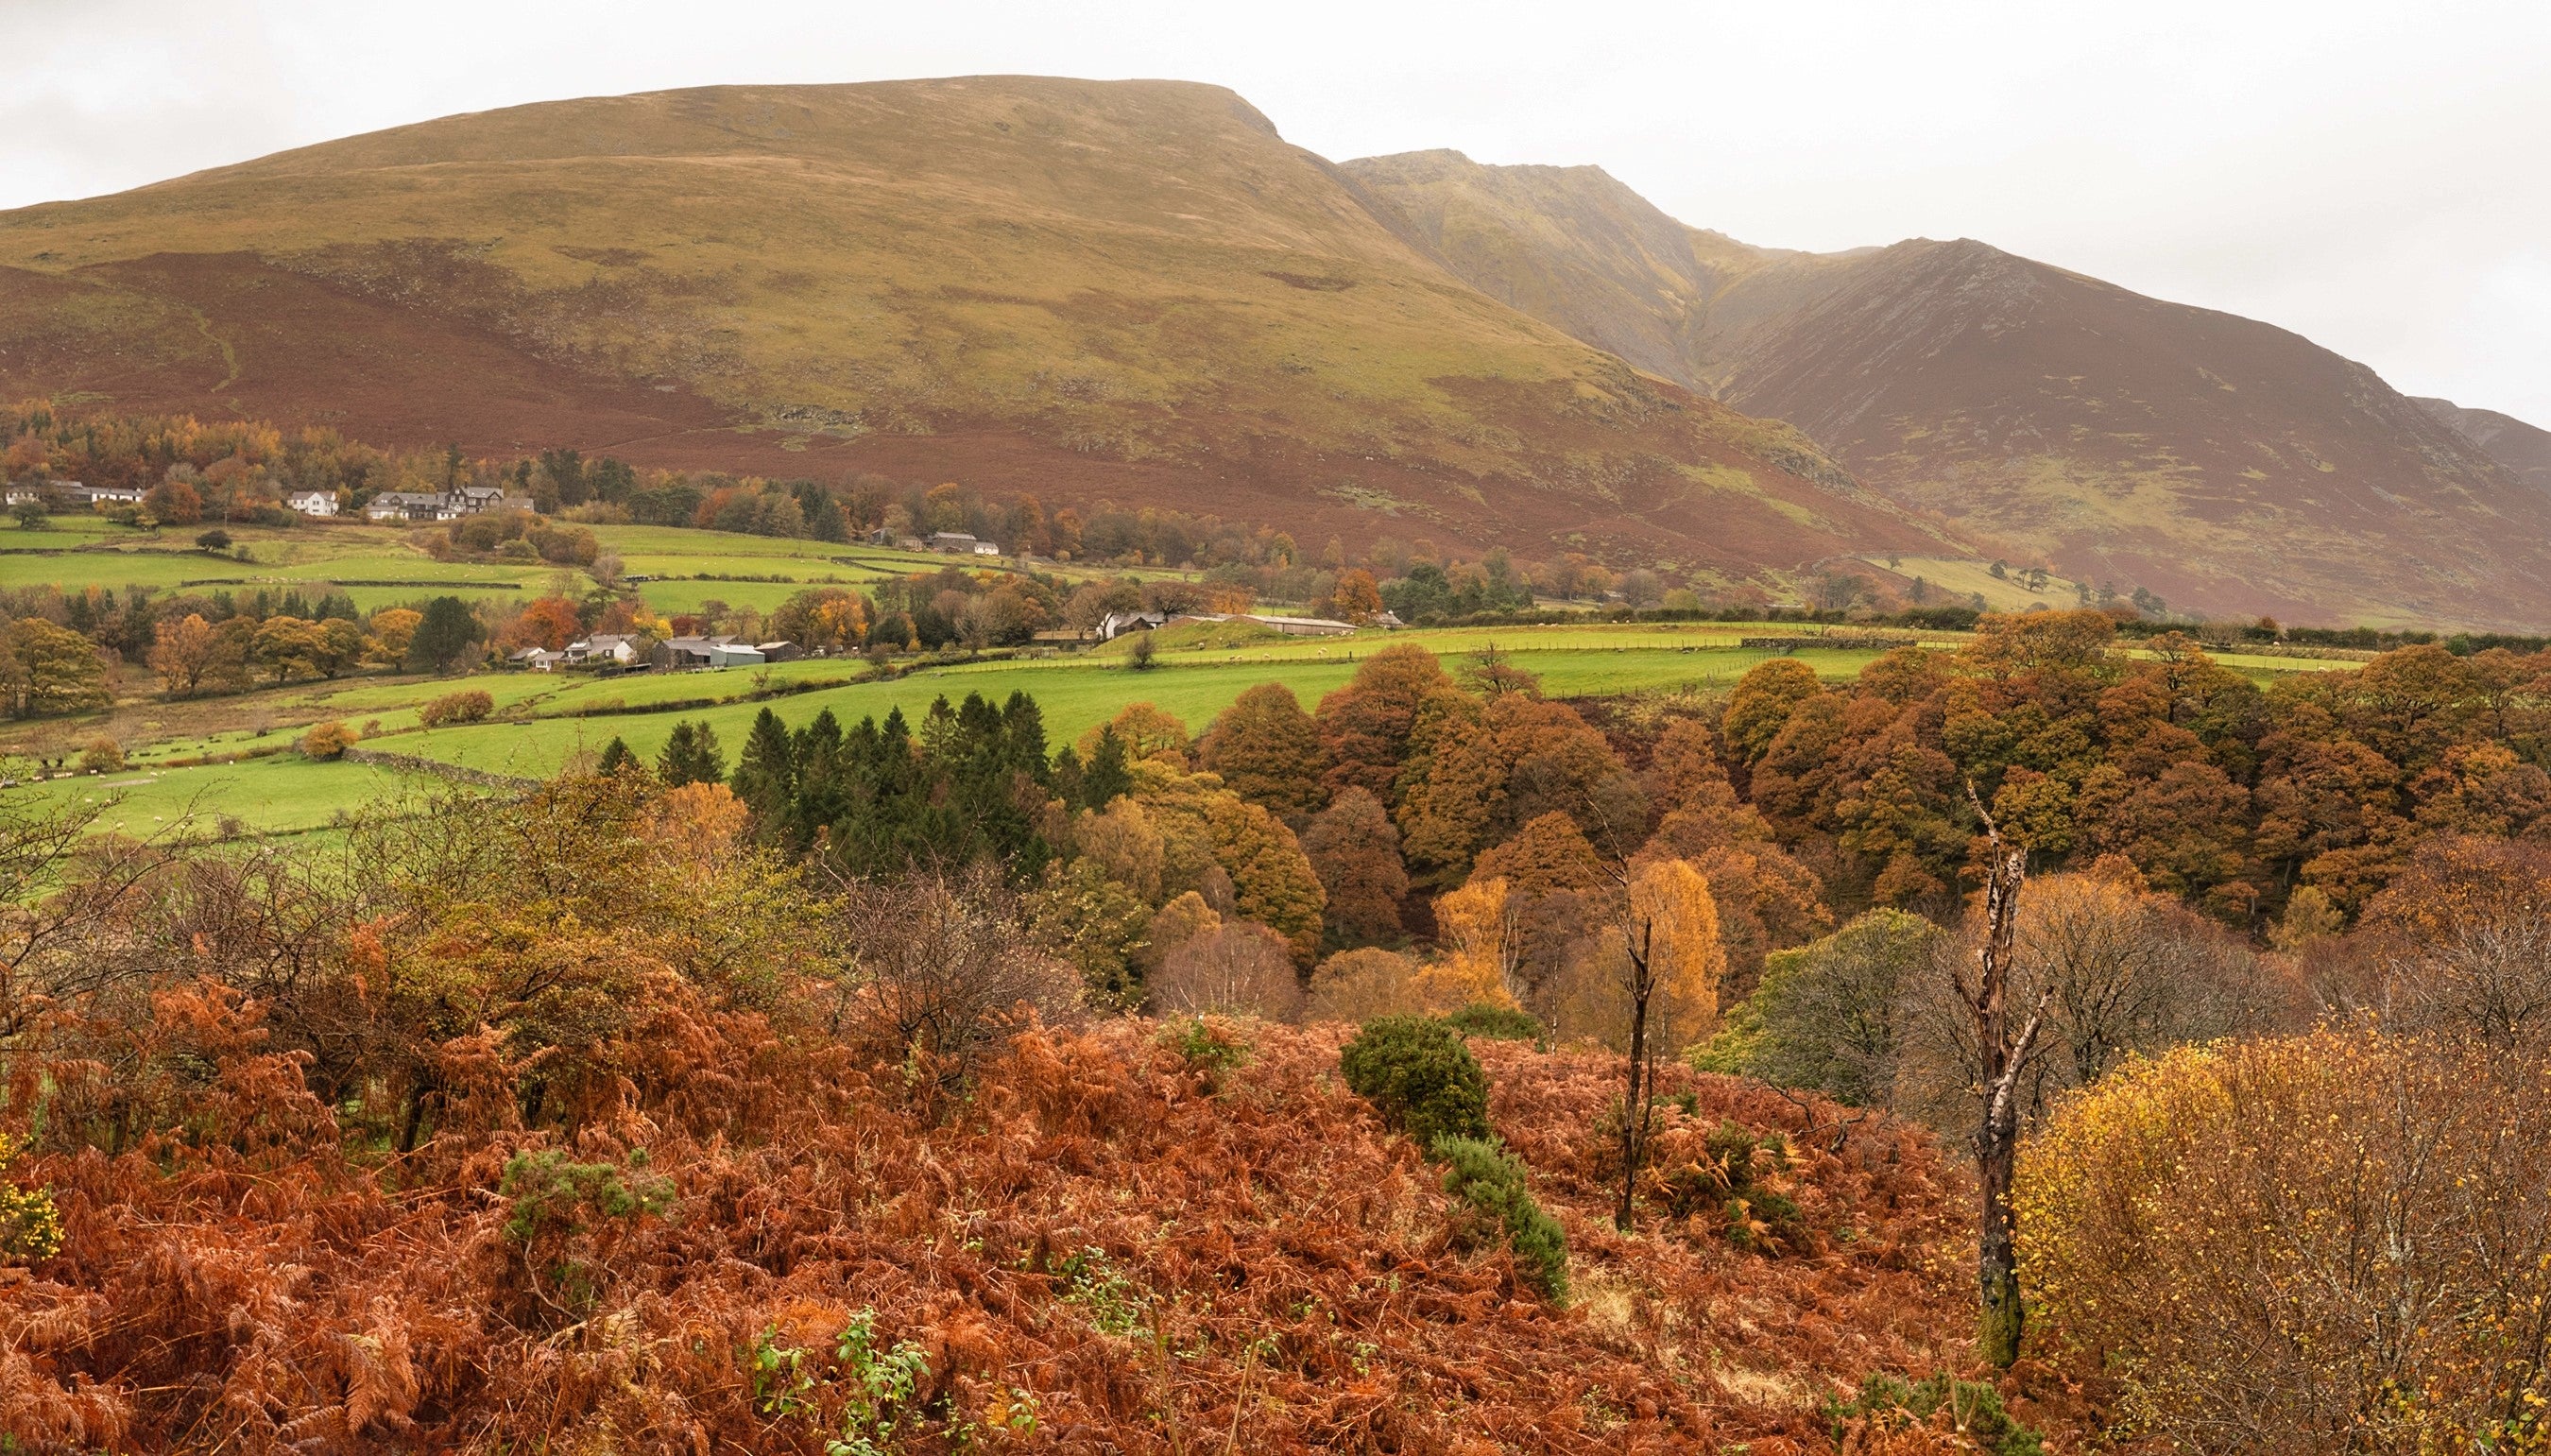 The autumn view out to Blencathra, also called Saddleback, which is located near Keswick in the Lake District.